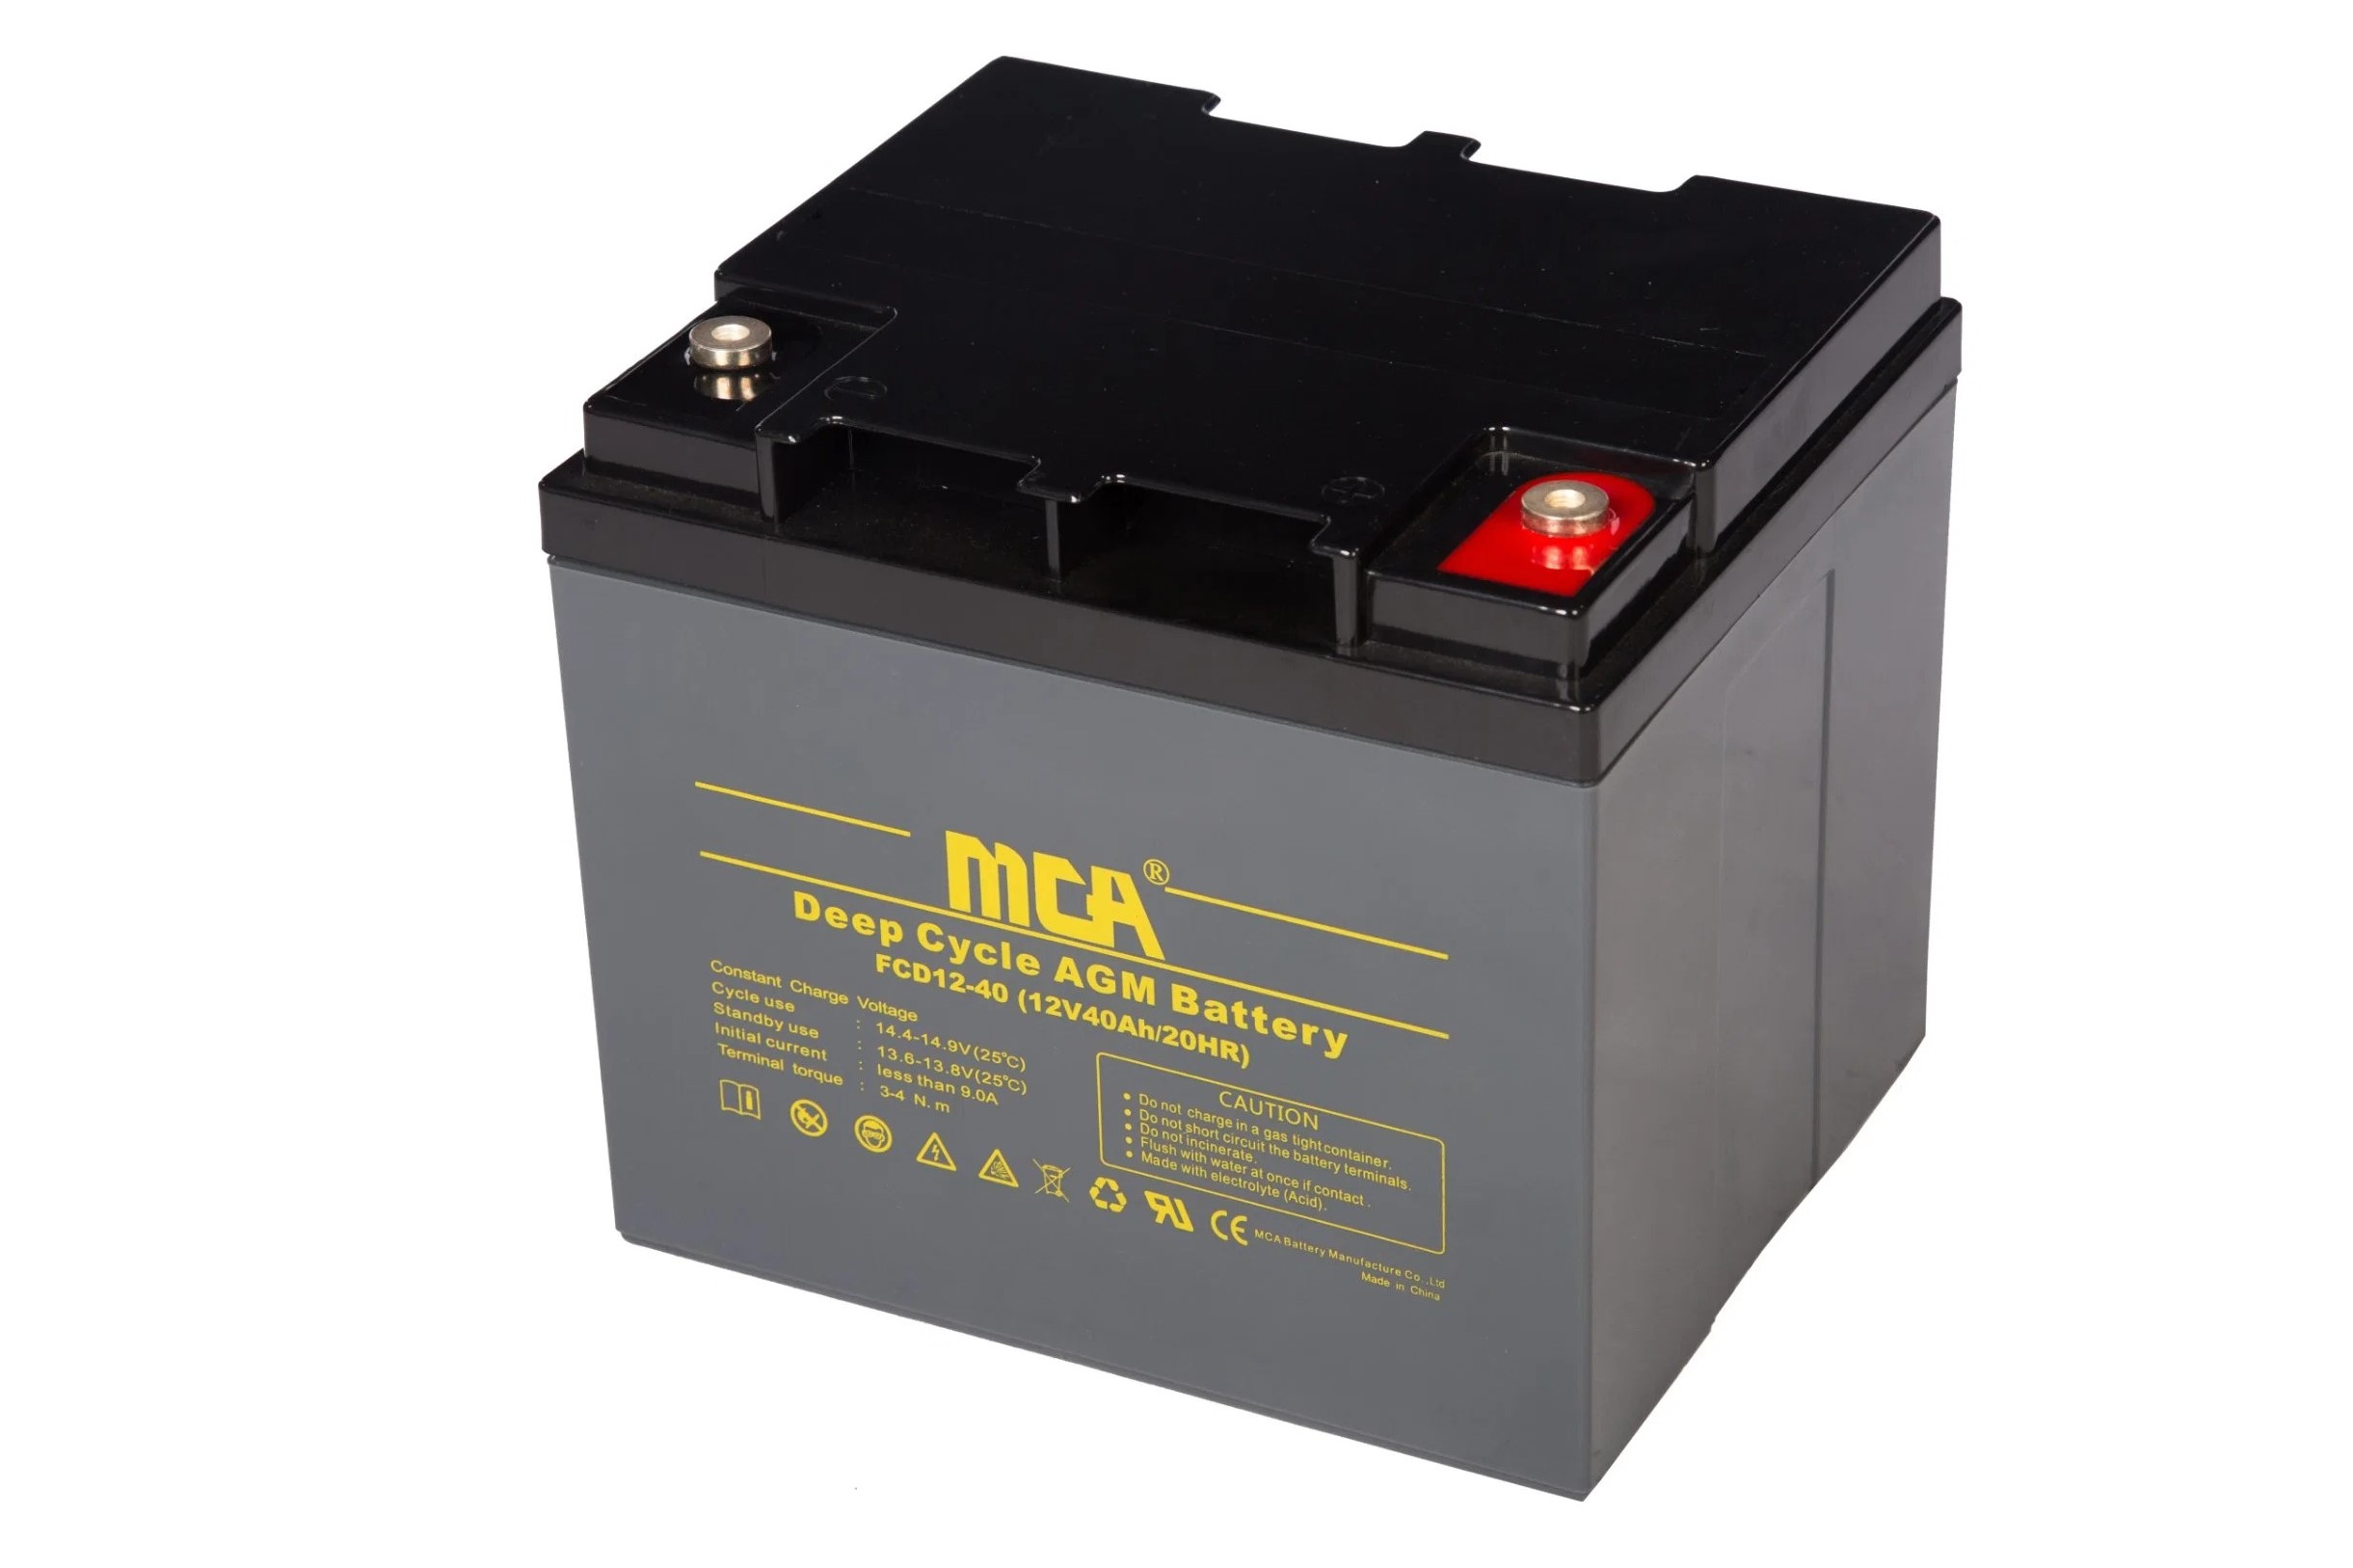 understanding-the-meaning-of-mca-on-batteries